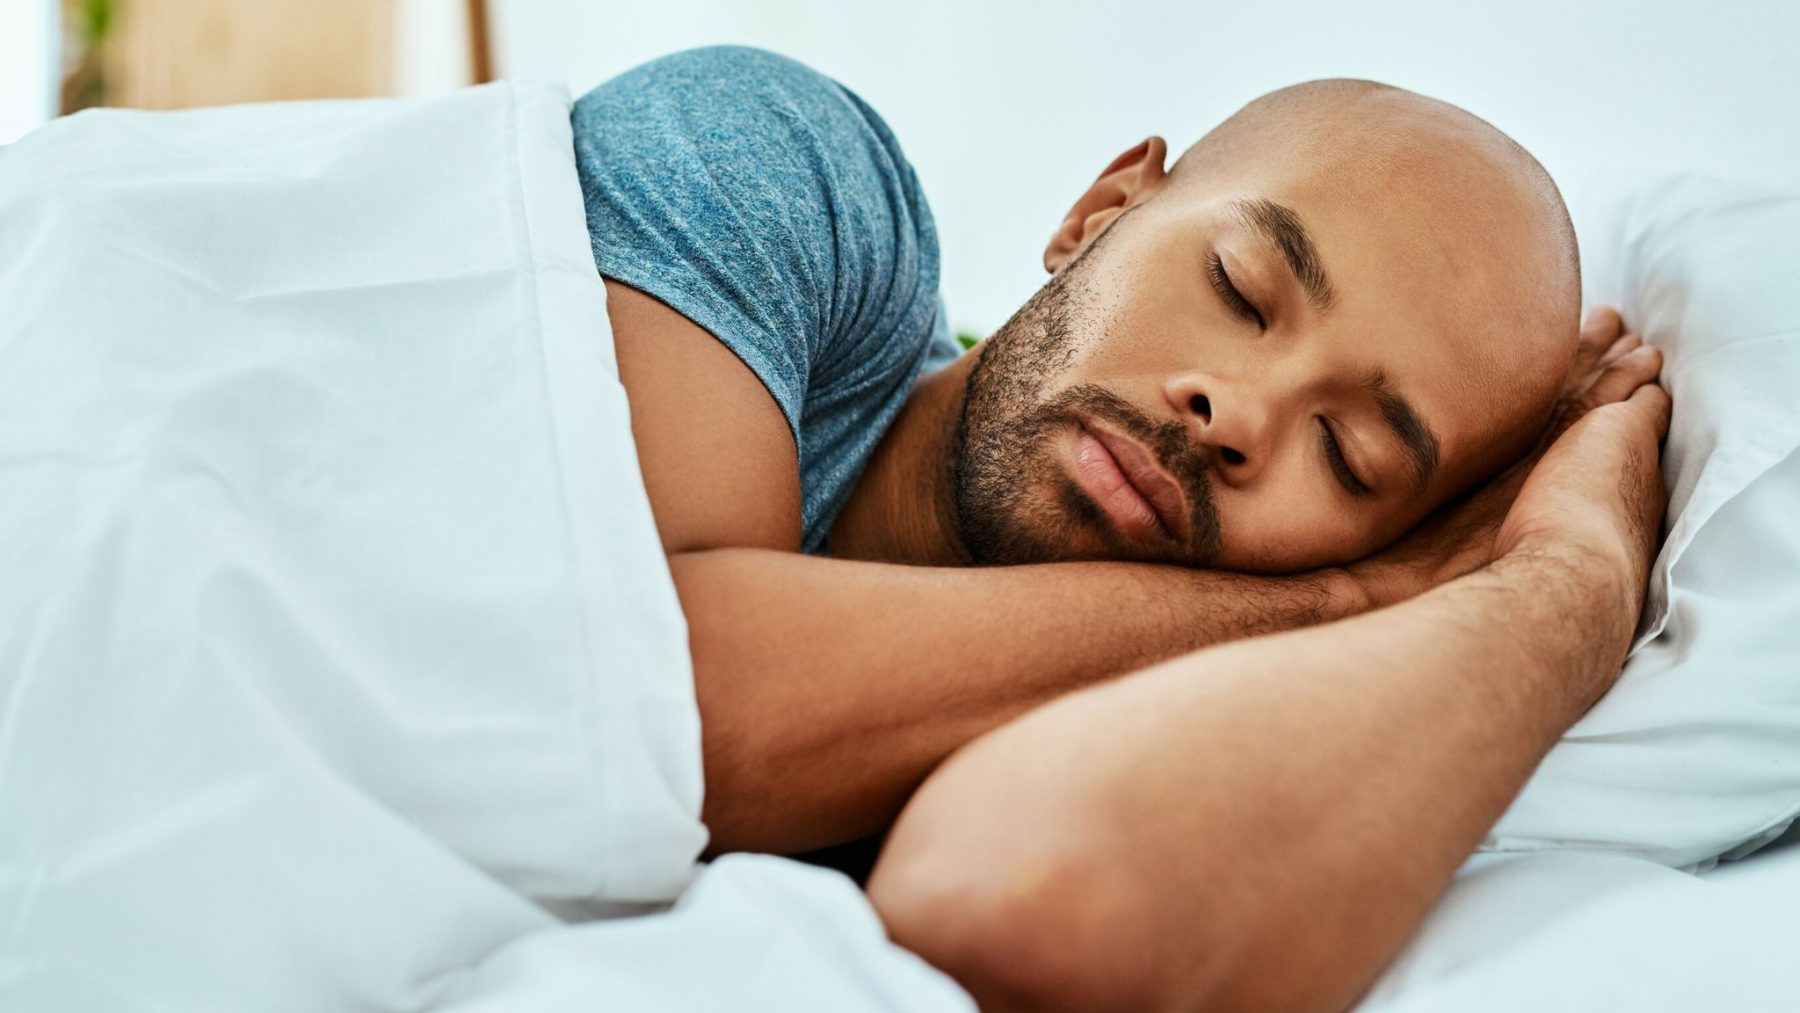 Man sleeping soundly in his bed